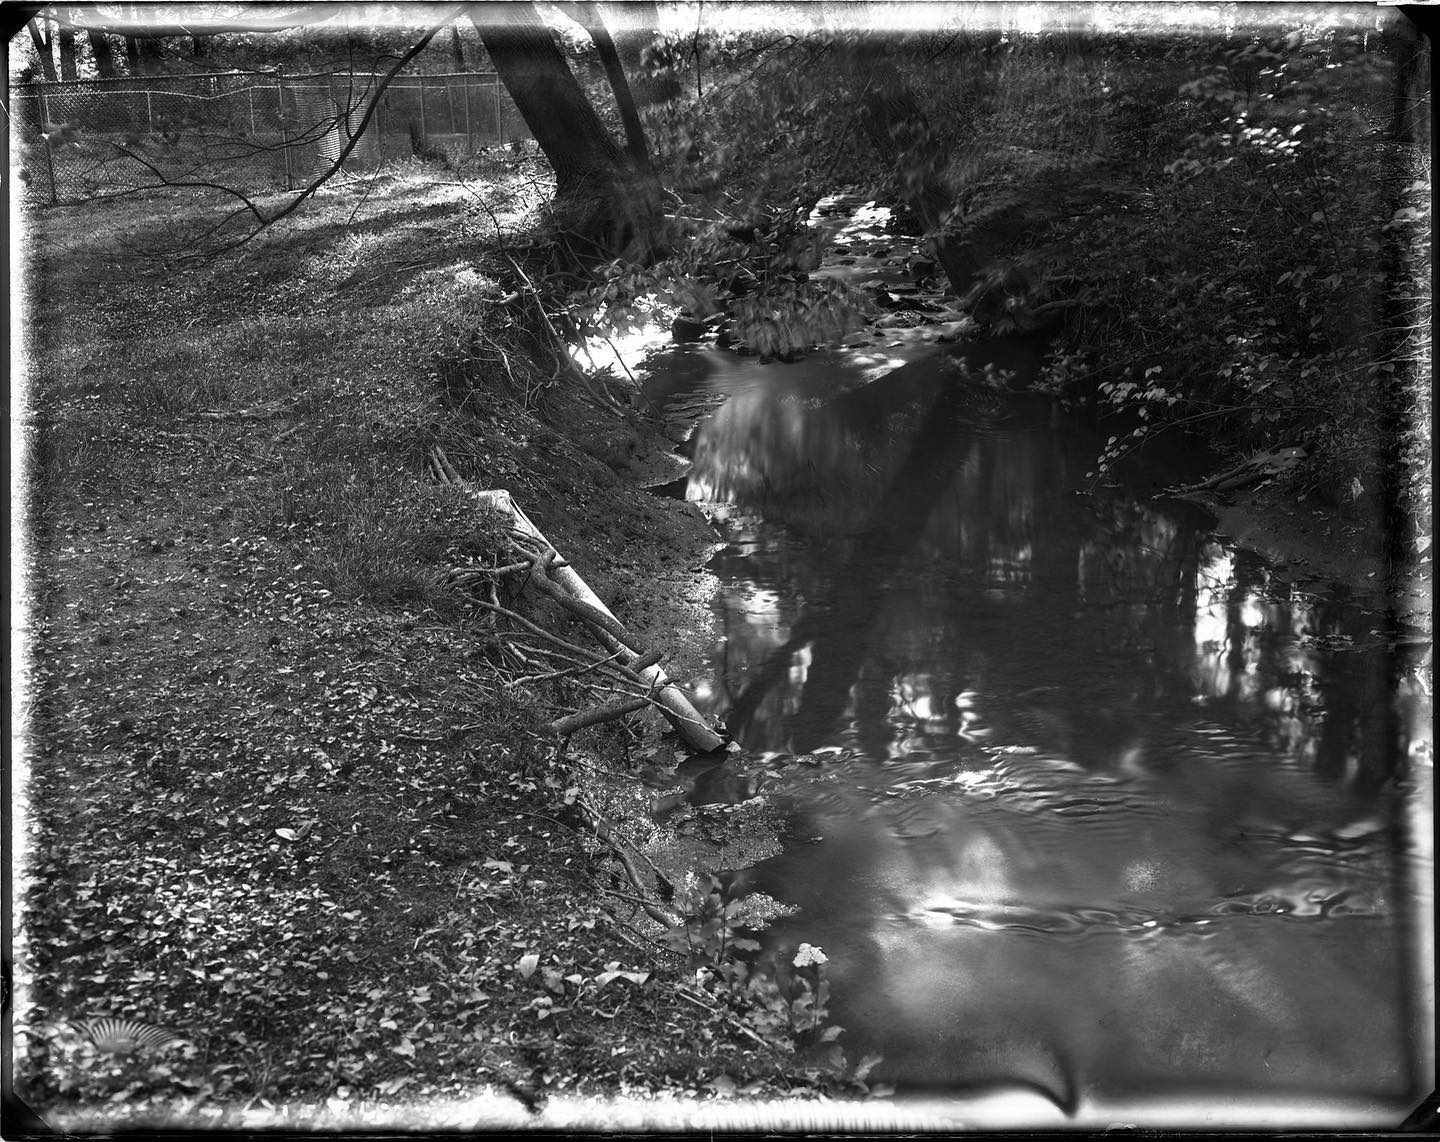 Creek

Shot yesterday in my back yard using the Speed Graphic, @pictoriographica Dry Plate, batch 11, expired April 2020, ISO 2. Exposed for 1:20, f/22. This was to test my @20thcenturycamera wet/dry plate holder. Pretty happy with how it came out. #dryplate #dryplatephotography #film #filmphotography #filmphotographypodcast #heyfsc #quarantine #quarantineart